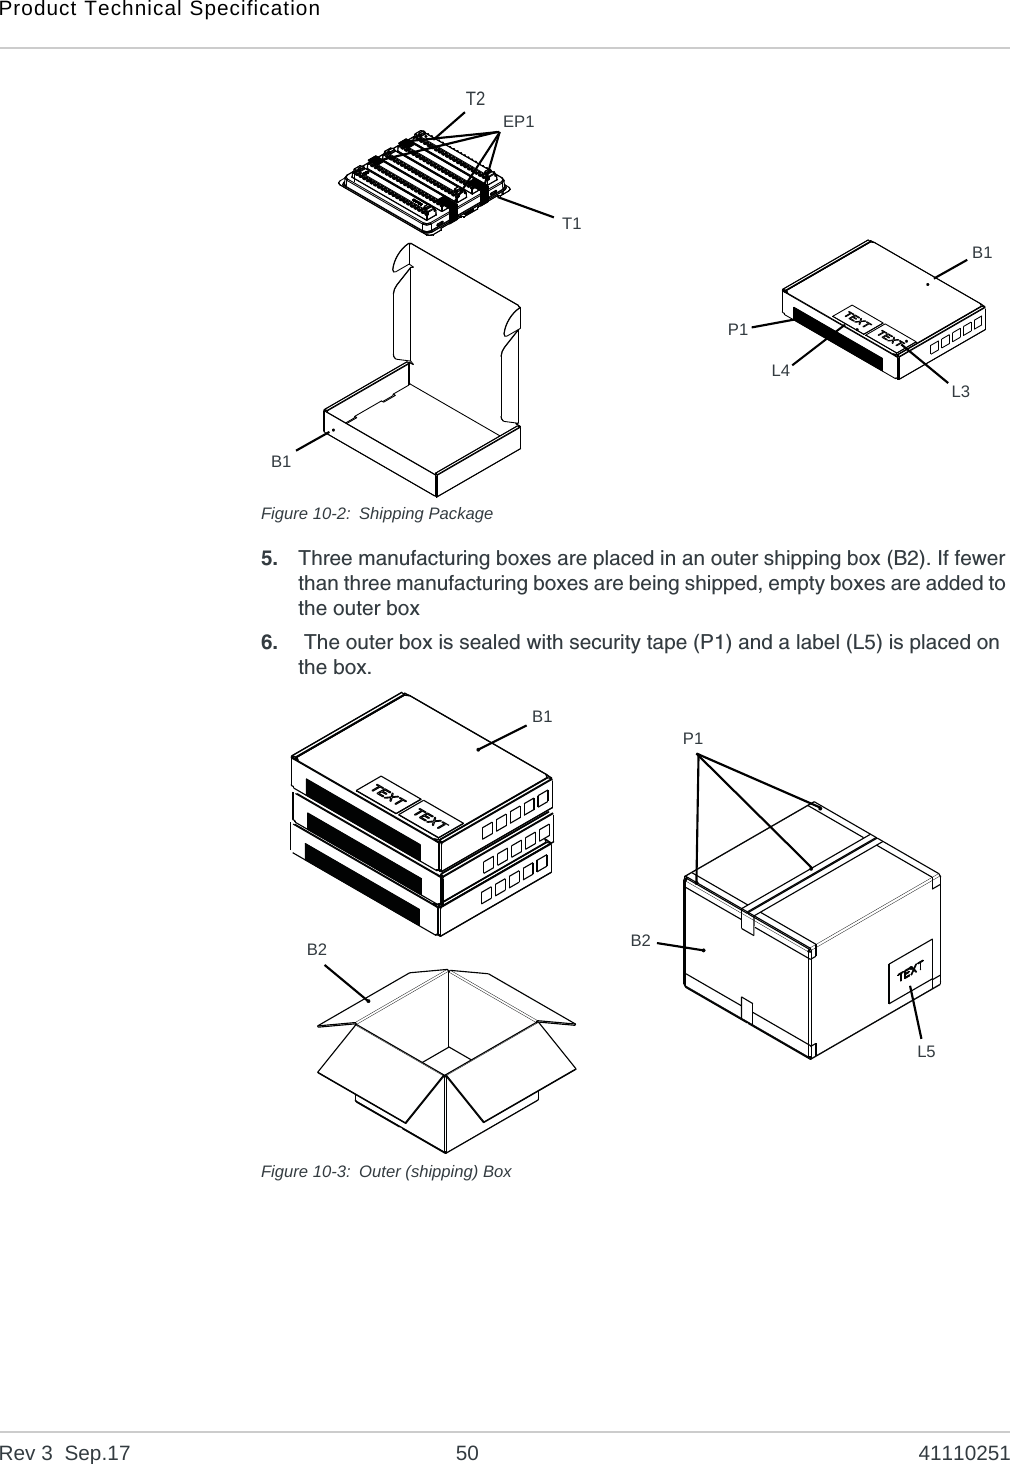 Product Technical SpecificationRev 3  Sep.17 50 41110251 Figure 10-2: Shipping Package5. Three manufacturing boxes are placed in an outer shipping box (B2). If fewer than three manufacturing boxes are being shipped, empty boxes are added to the outer box6.  The outer box is sealed with security tape (P1) and a label (L5) is placed on the box. Figure 10-3: Outer (shipping) BoxT1T2EP1B1P1L4L3B1B1B2 B2P1L5